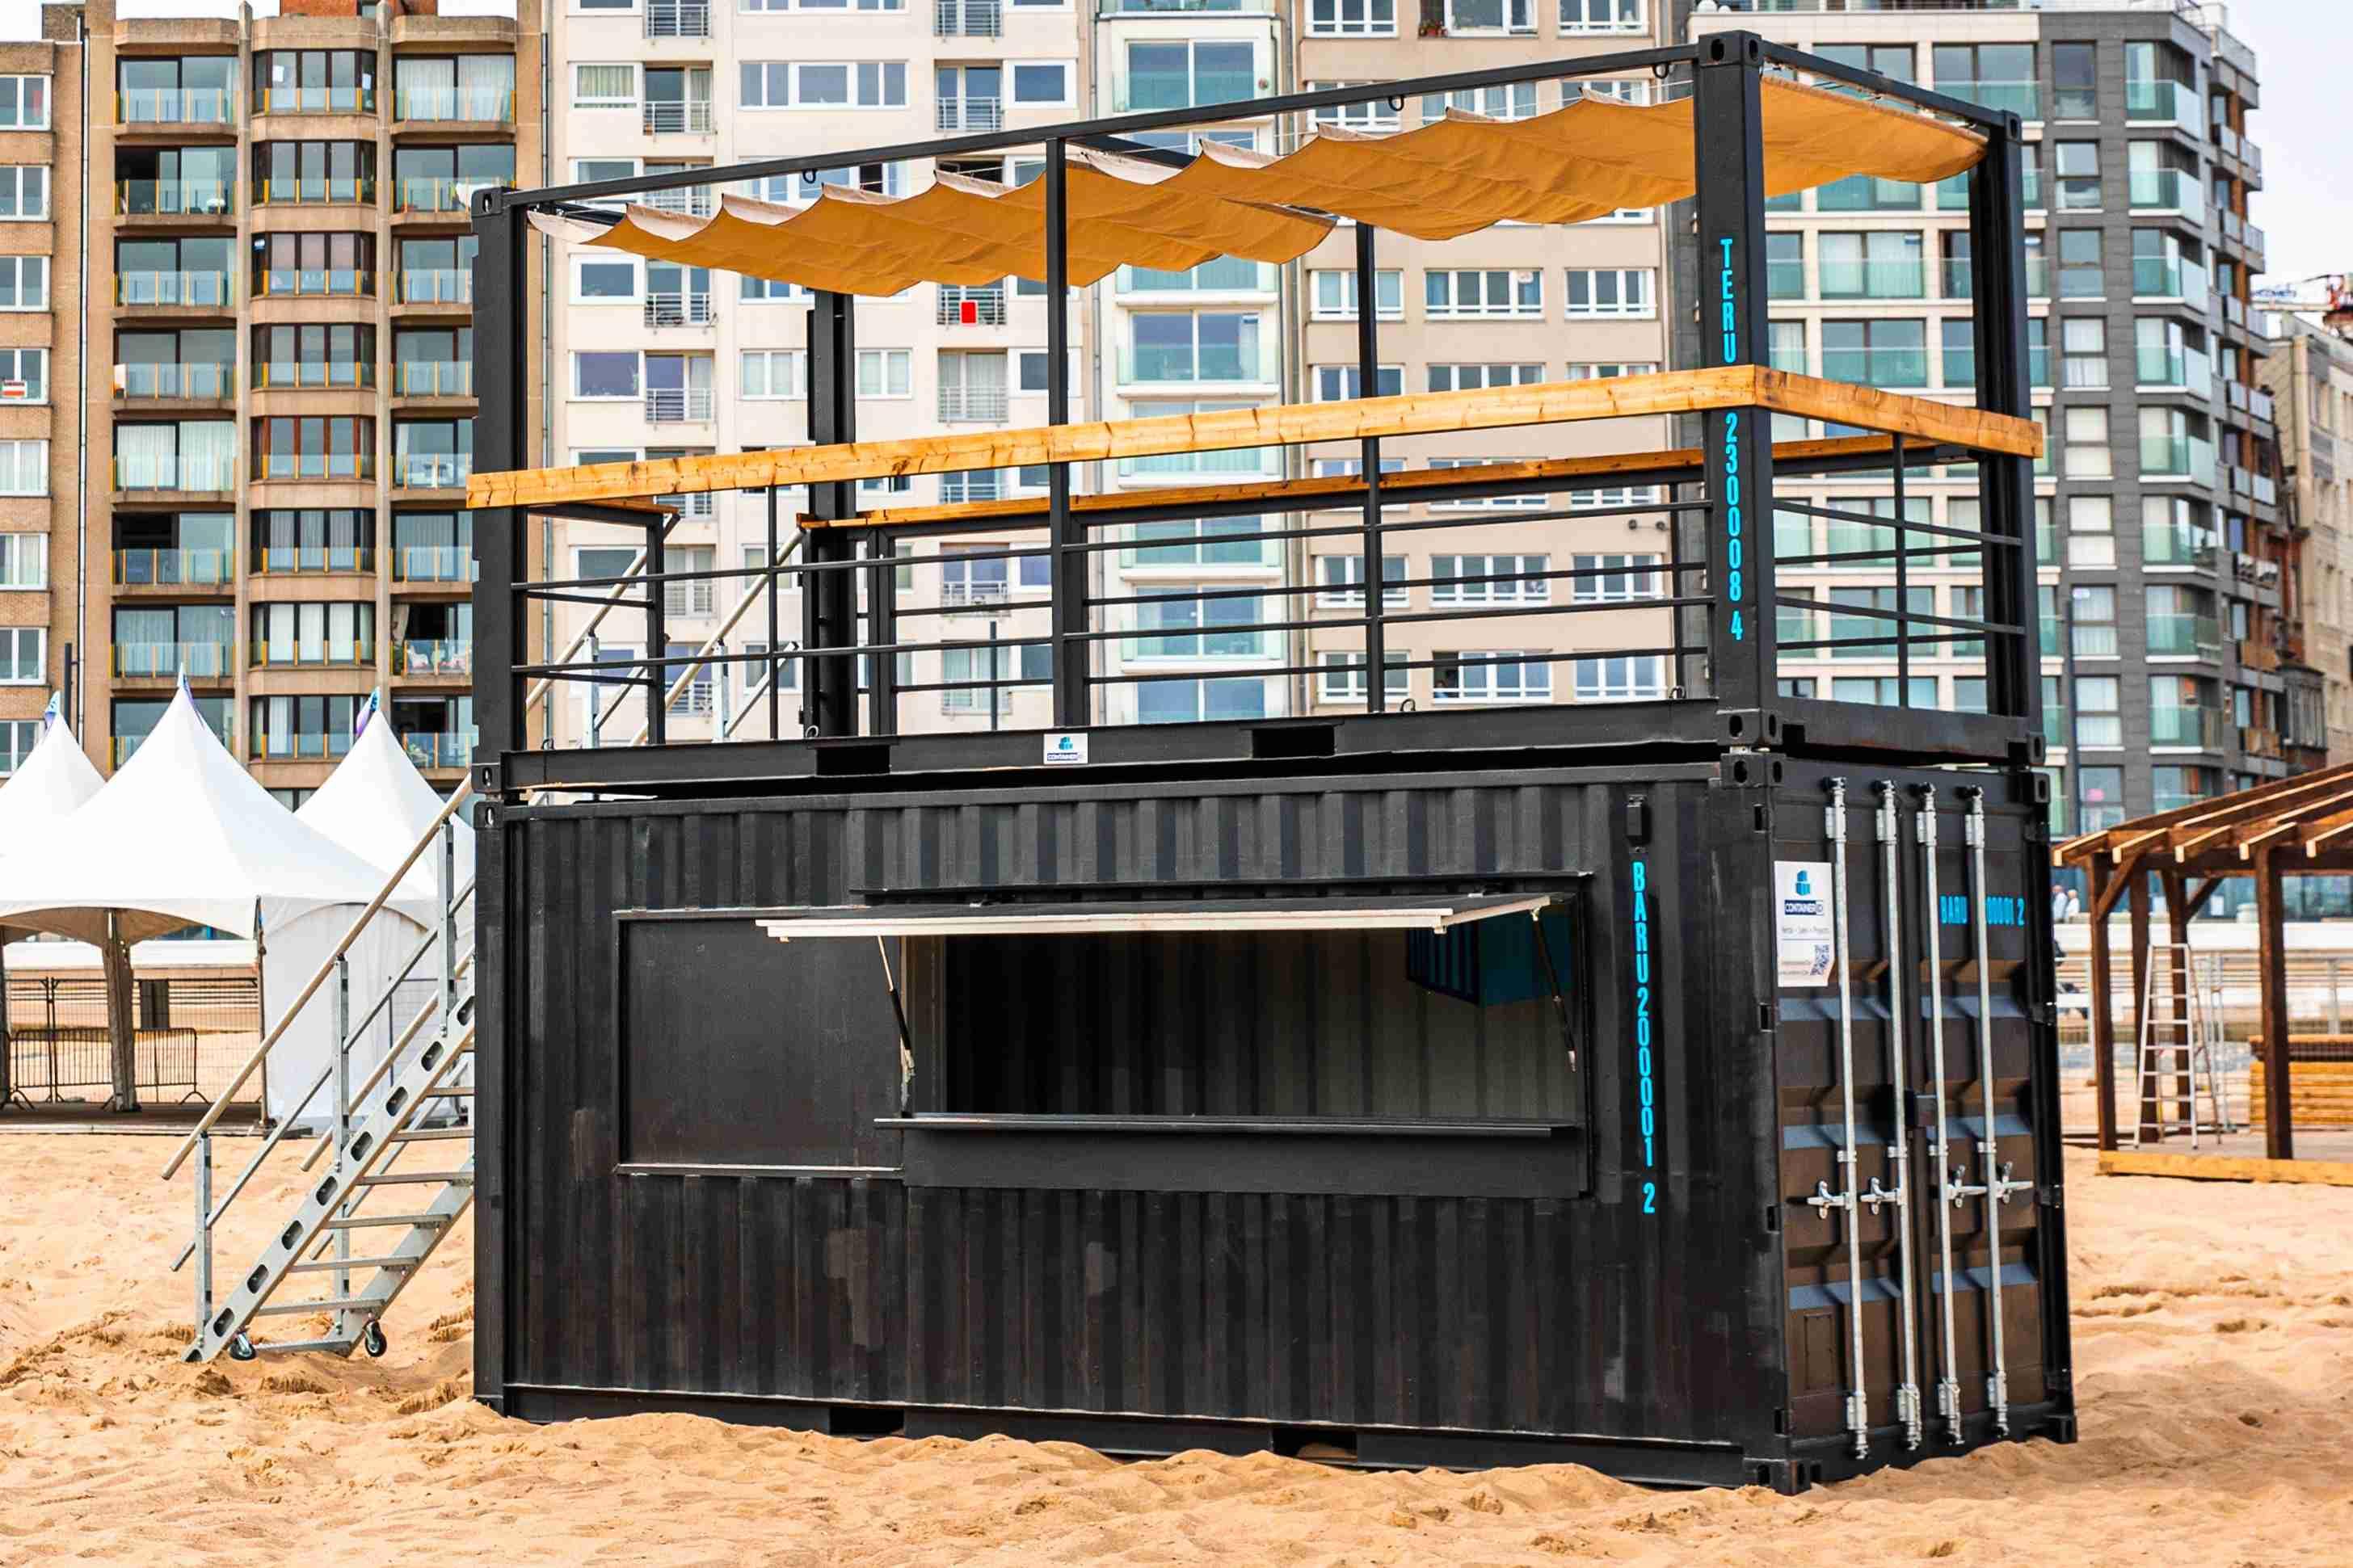 Mobile rooftop bar container with 360 degree views for festivals, functions and parties for hire or sale at ContainerID